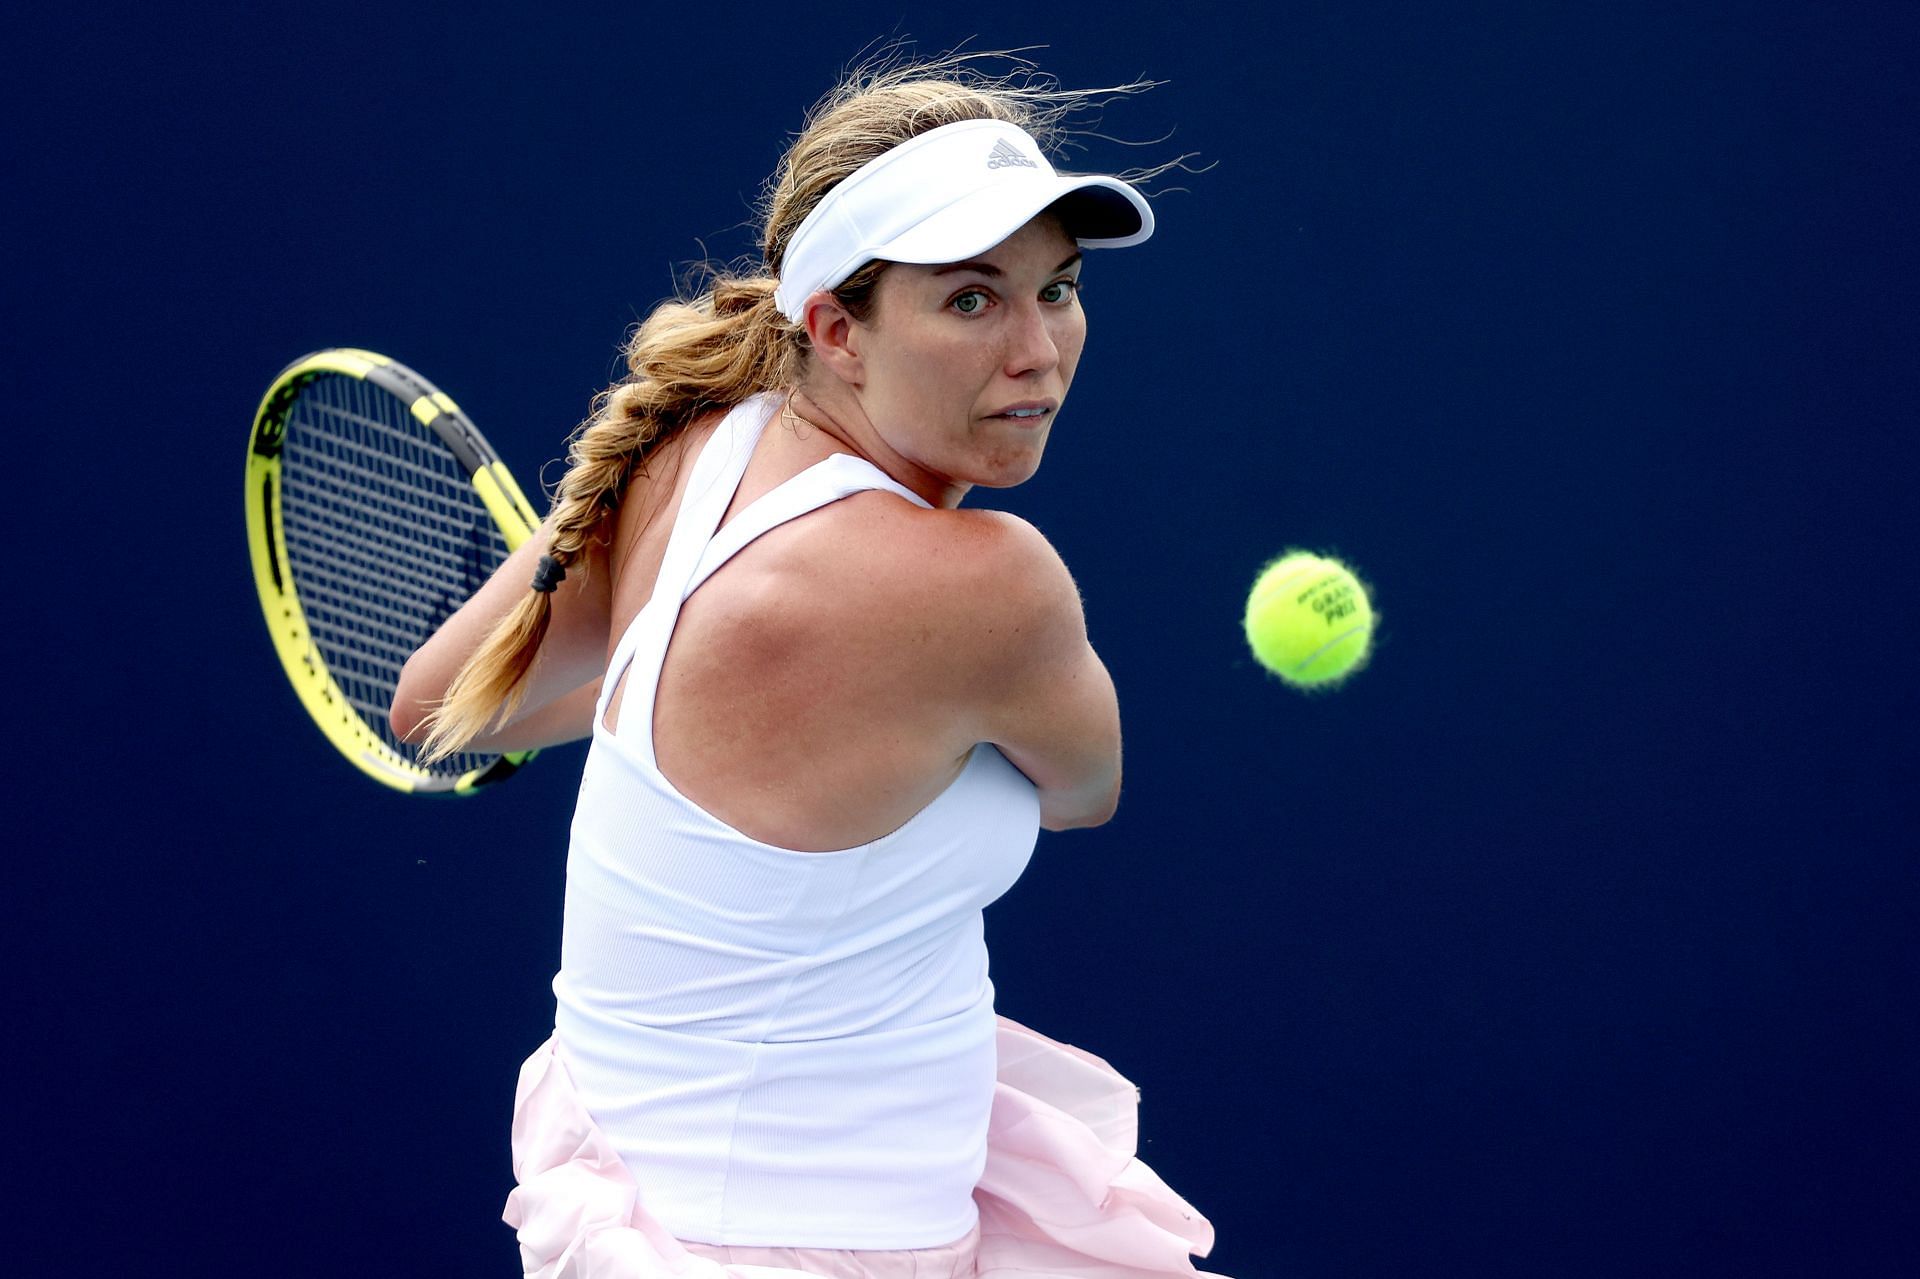 Danielle Collins hits a backhand at the 2022 Miami Open